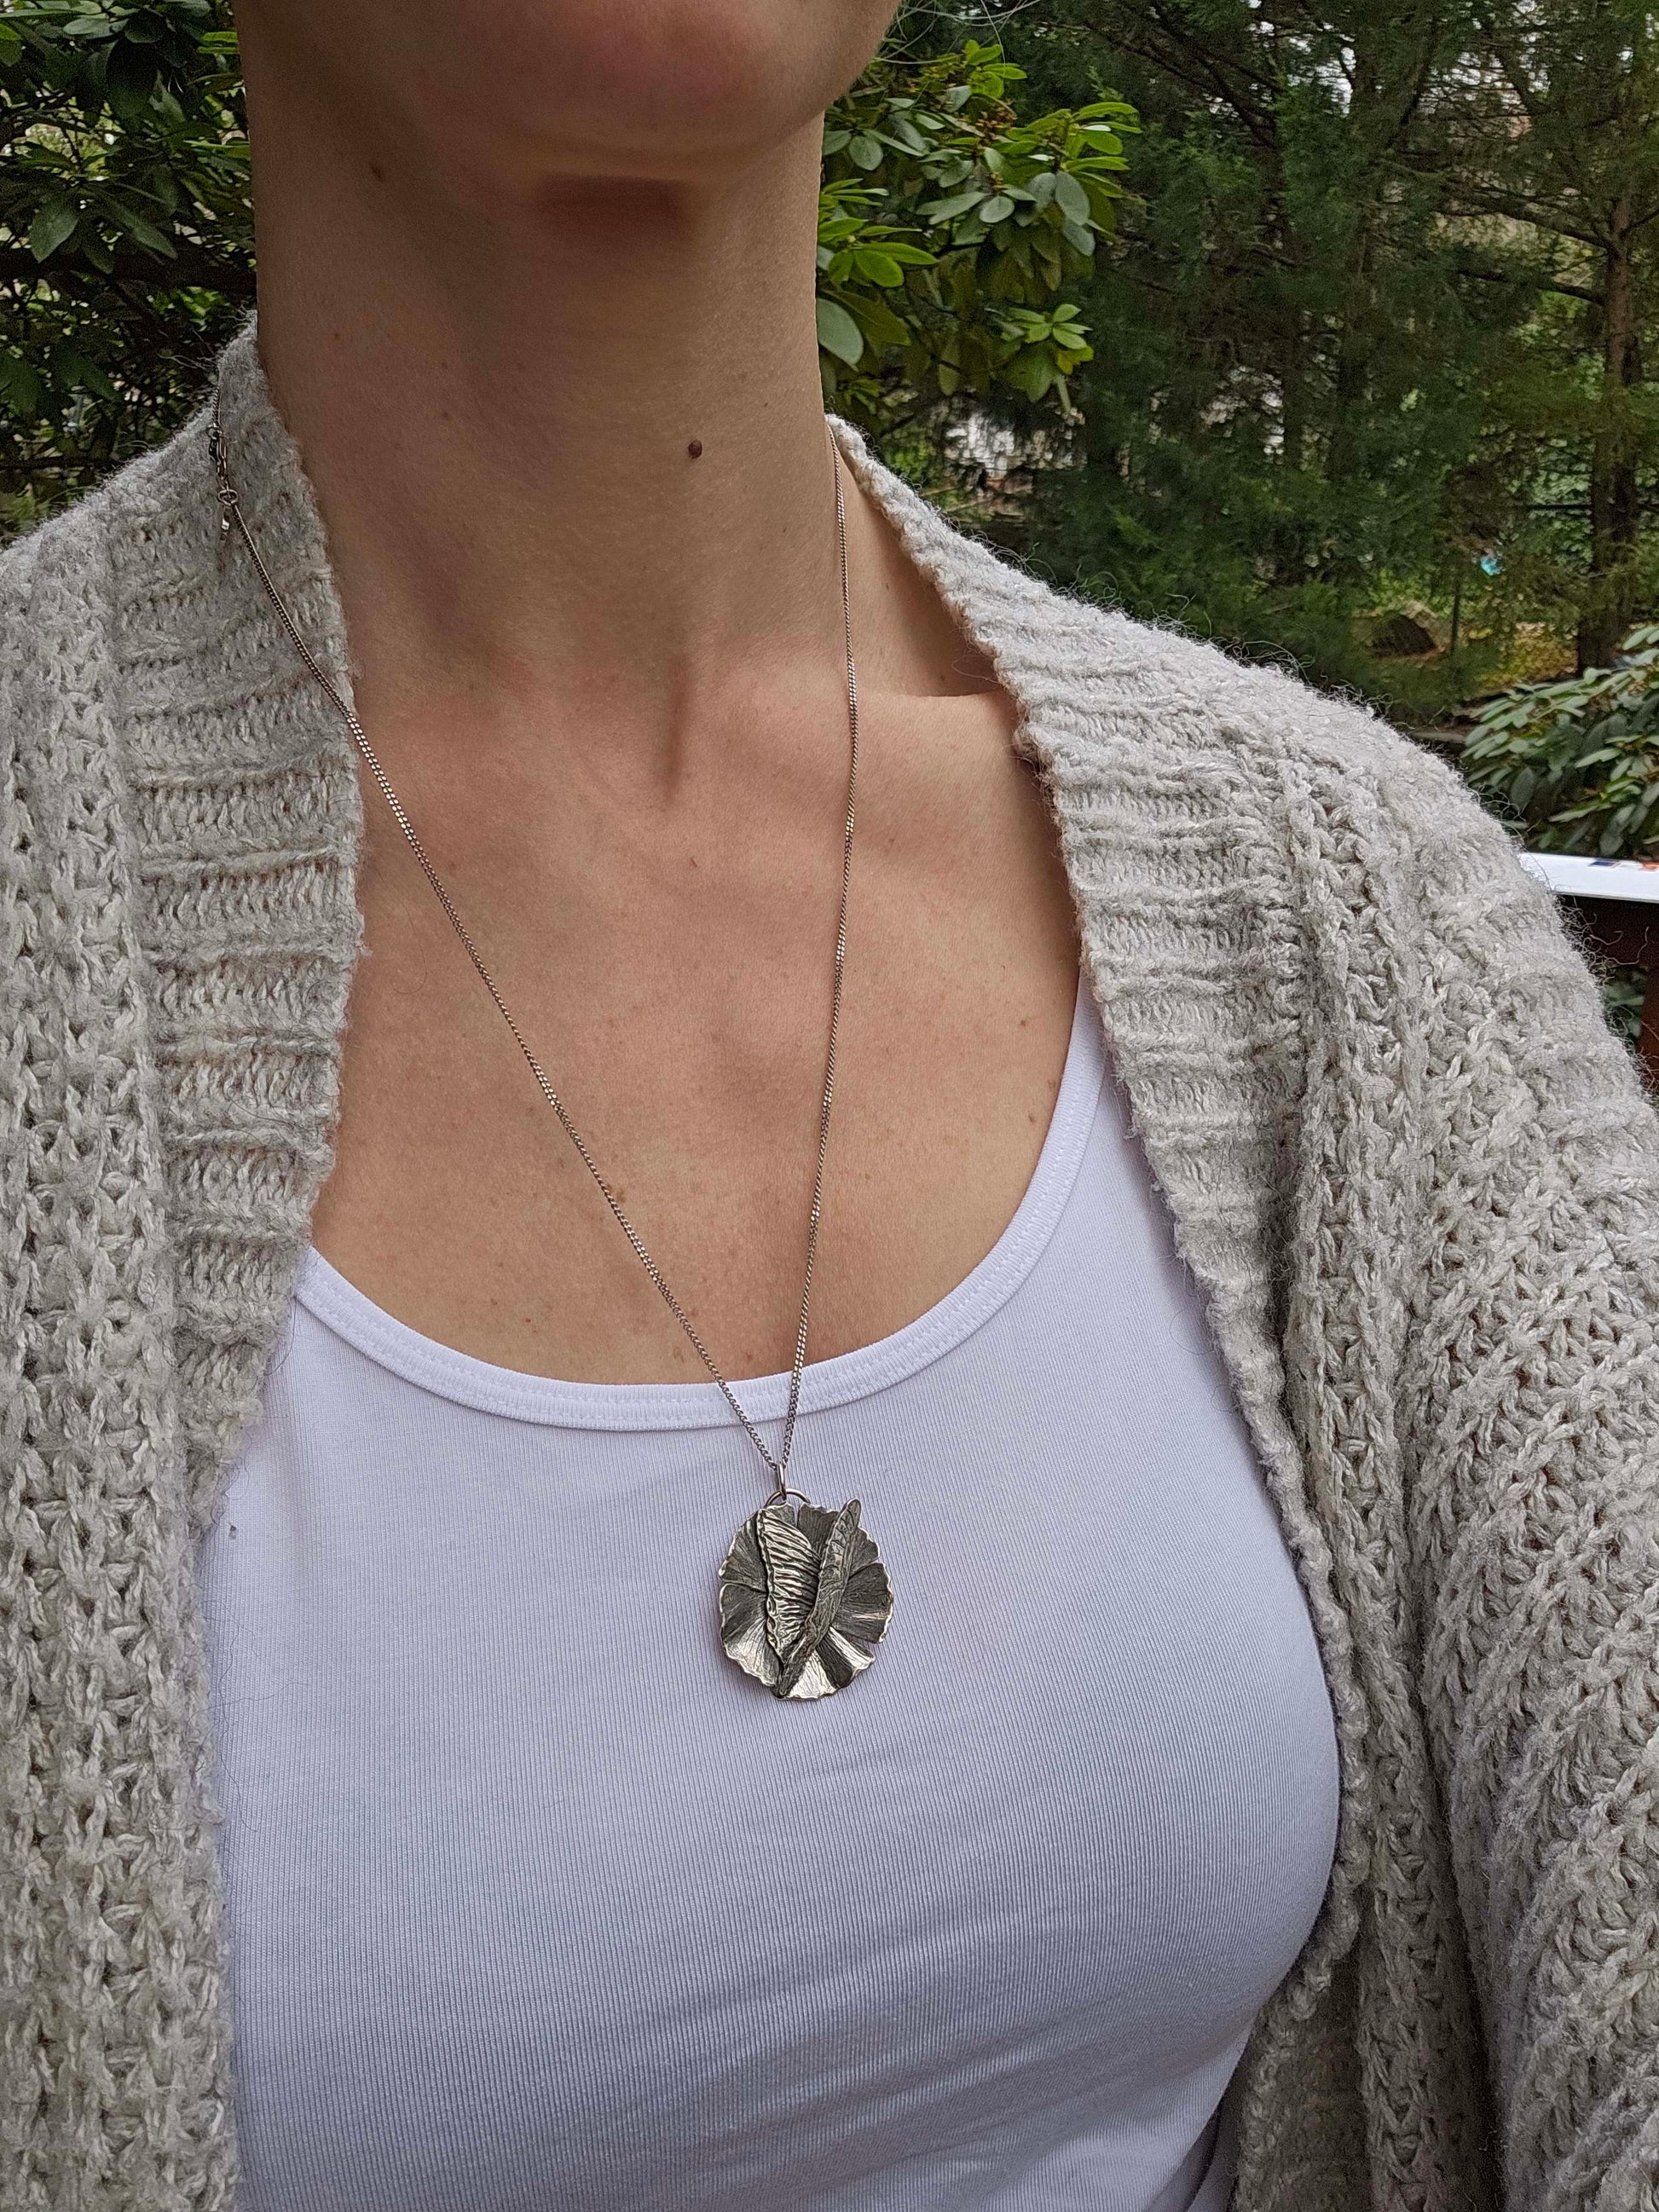 Handcrafted silver butterfly necklace with flower